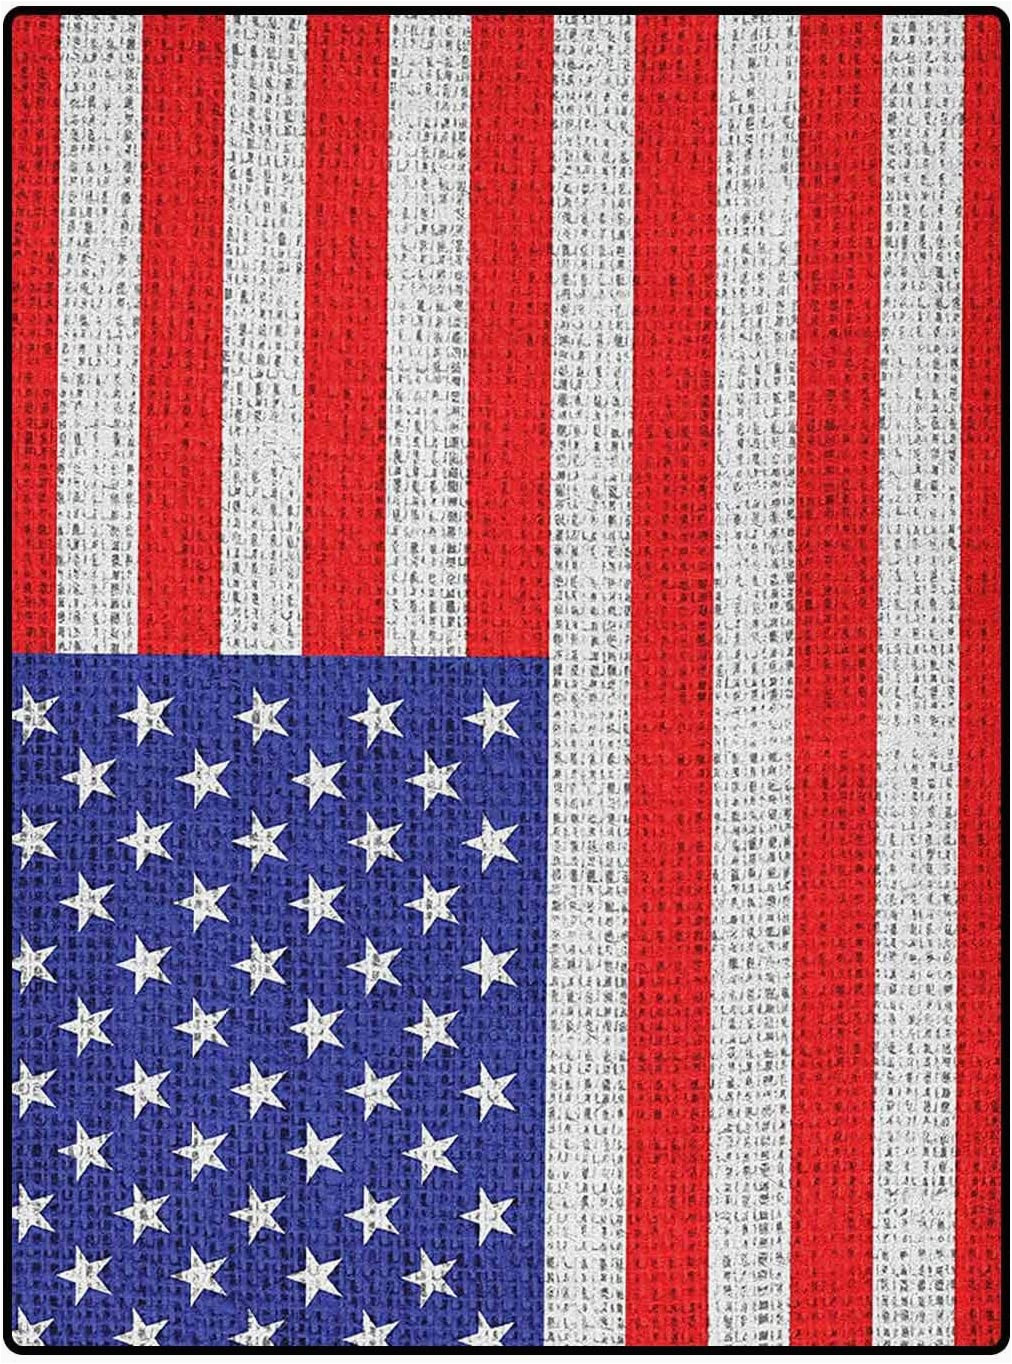 Red White Blue Rug Amazon Com Usa Rugs for Bedroom Girls area Rug for Boys